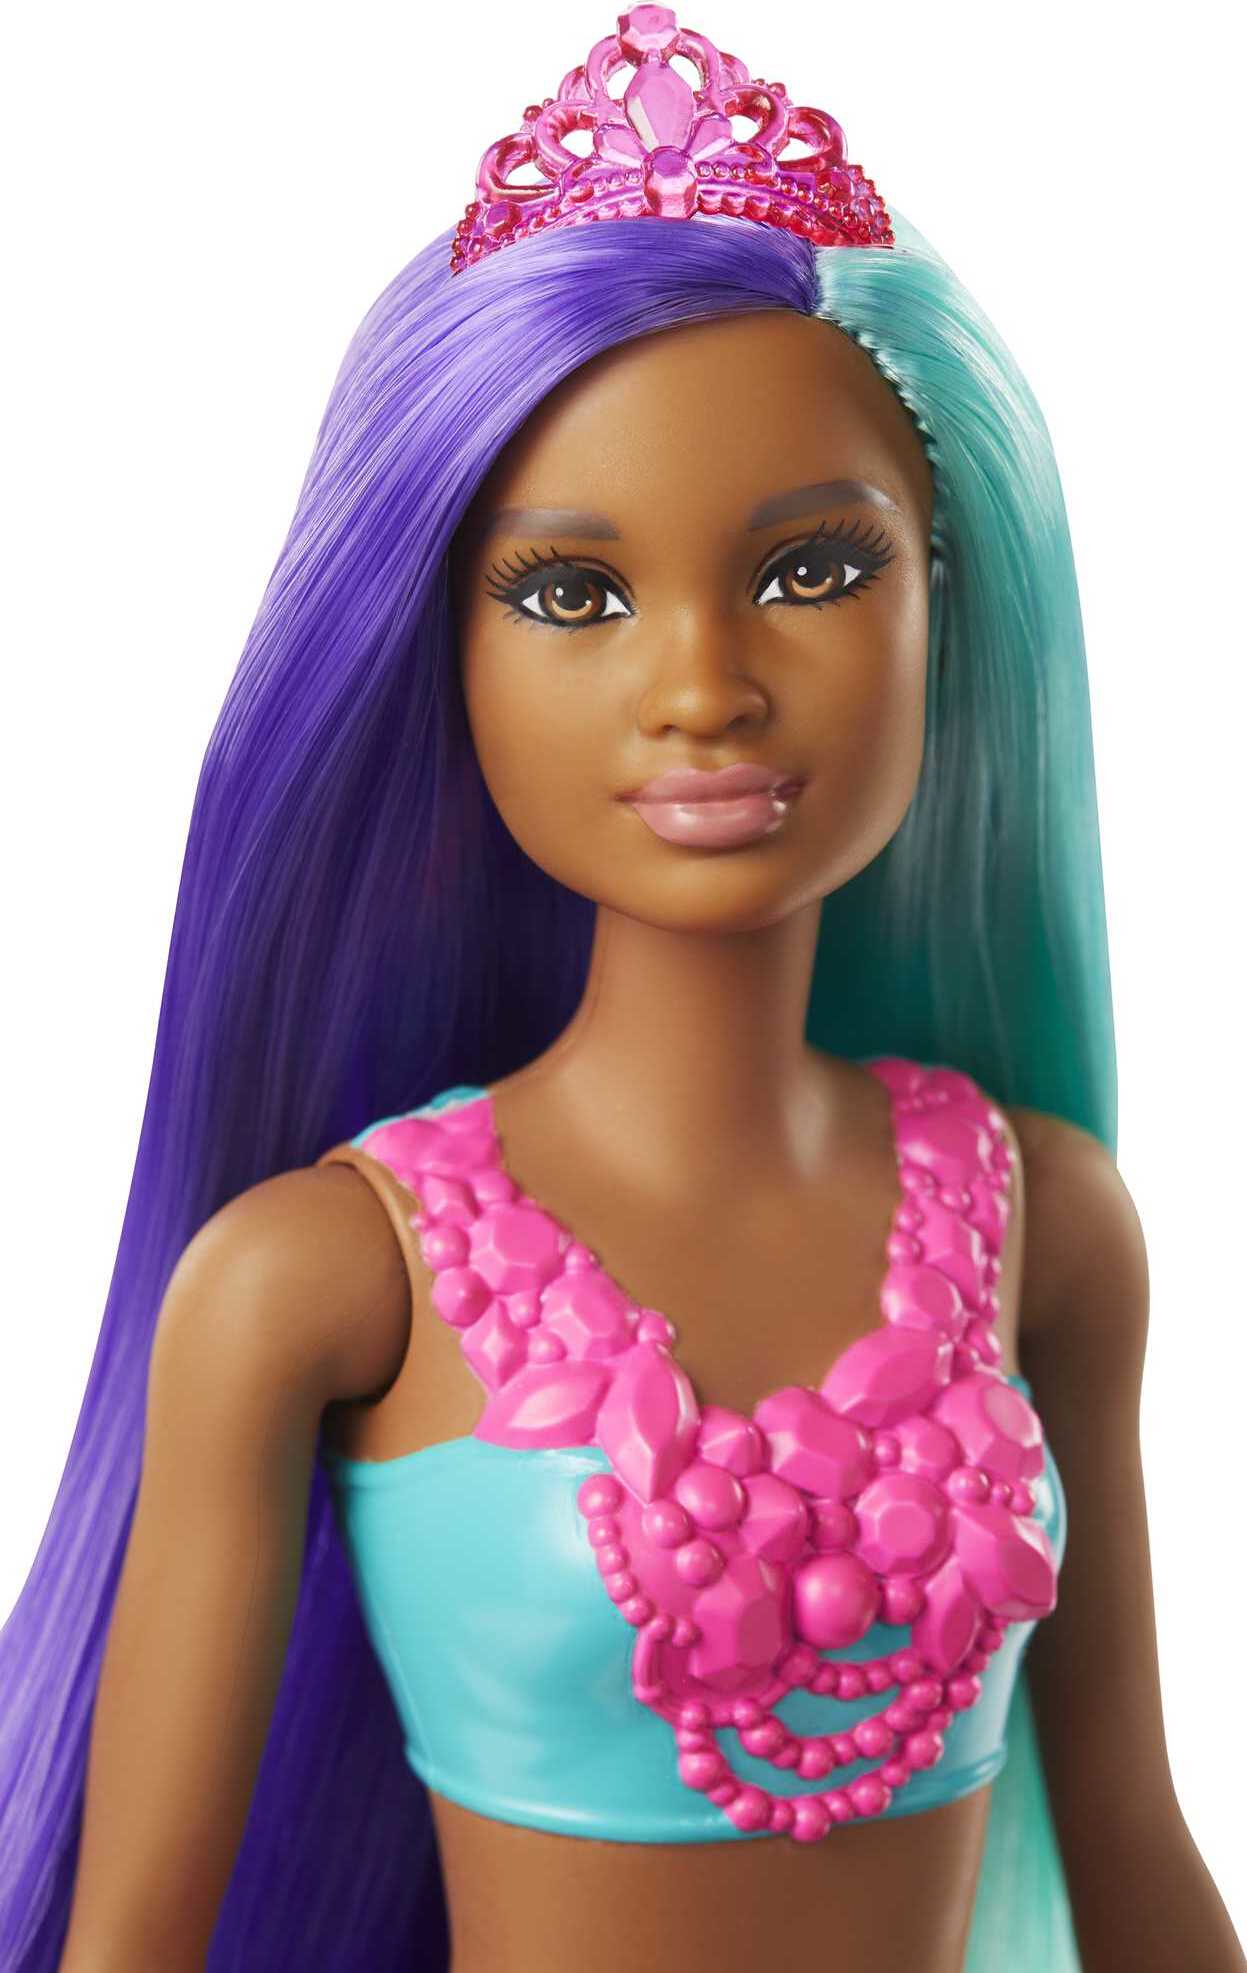 Barbie Dreamtopia Mermaid Doll with Teal & Purple Hair, Yellow Tail & Tiara Accessory - image 3 of 6